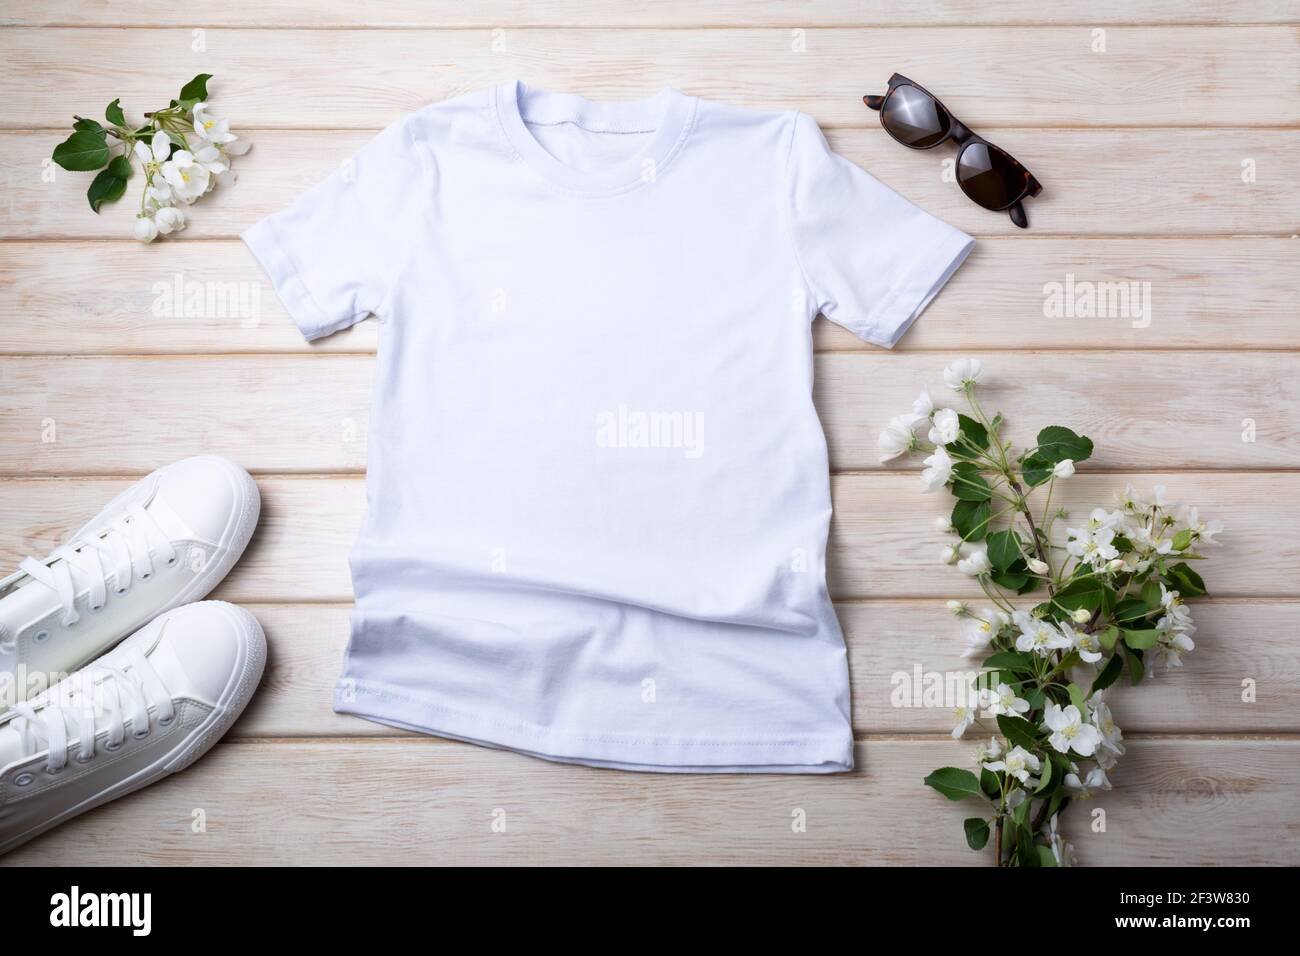 White womens cotton T-shirt mockup with sneakers, sunglasses and apple blossom. Design t shirt template, tee print presentation mock up Stock Photo